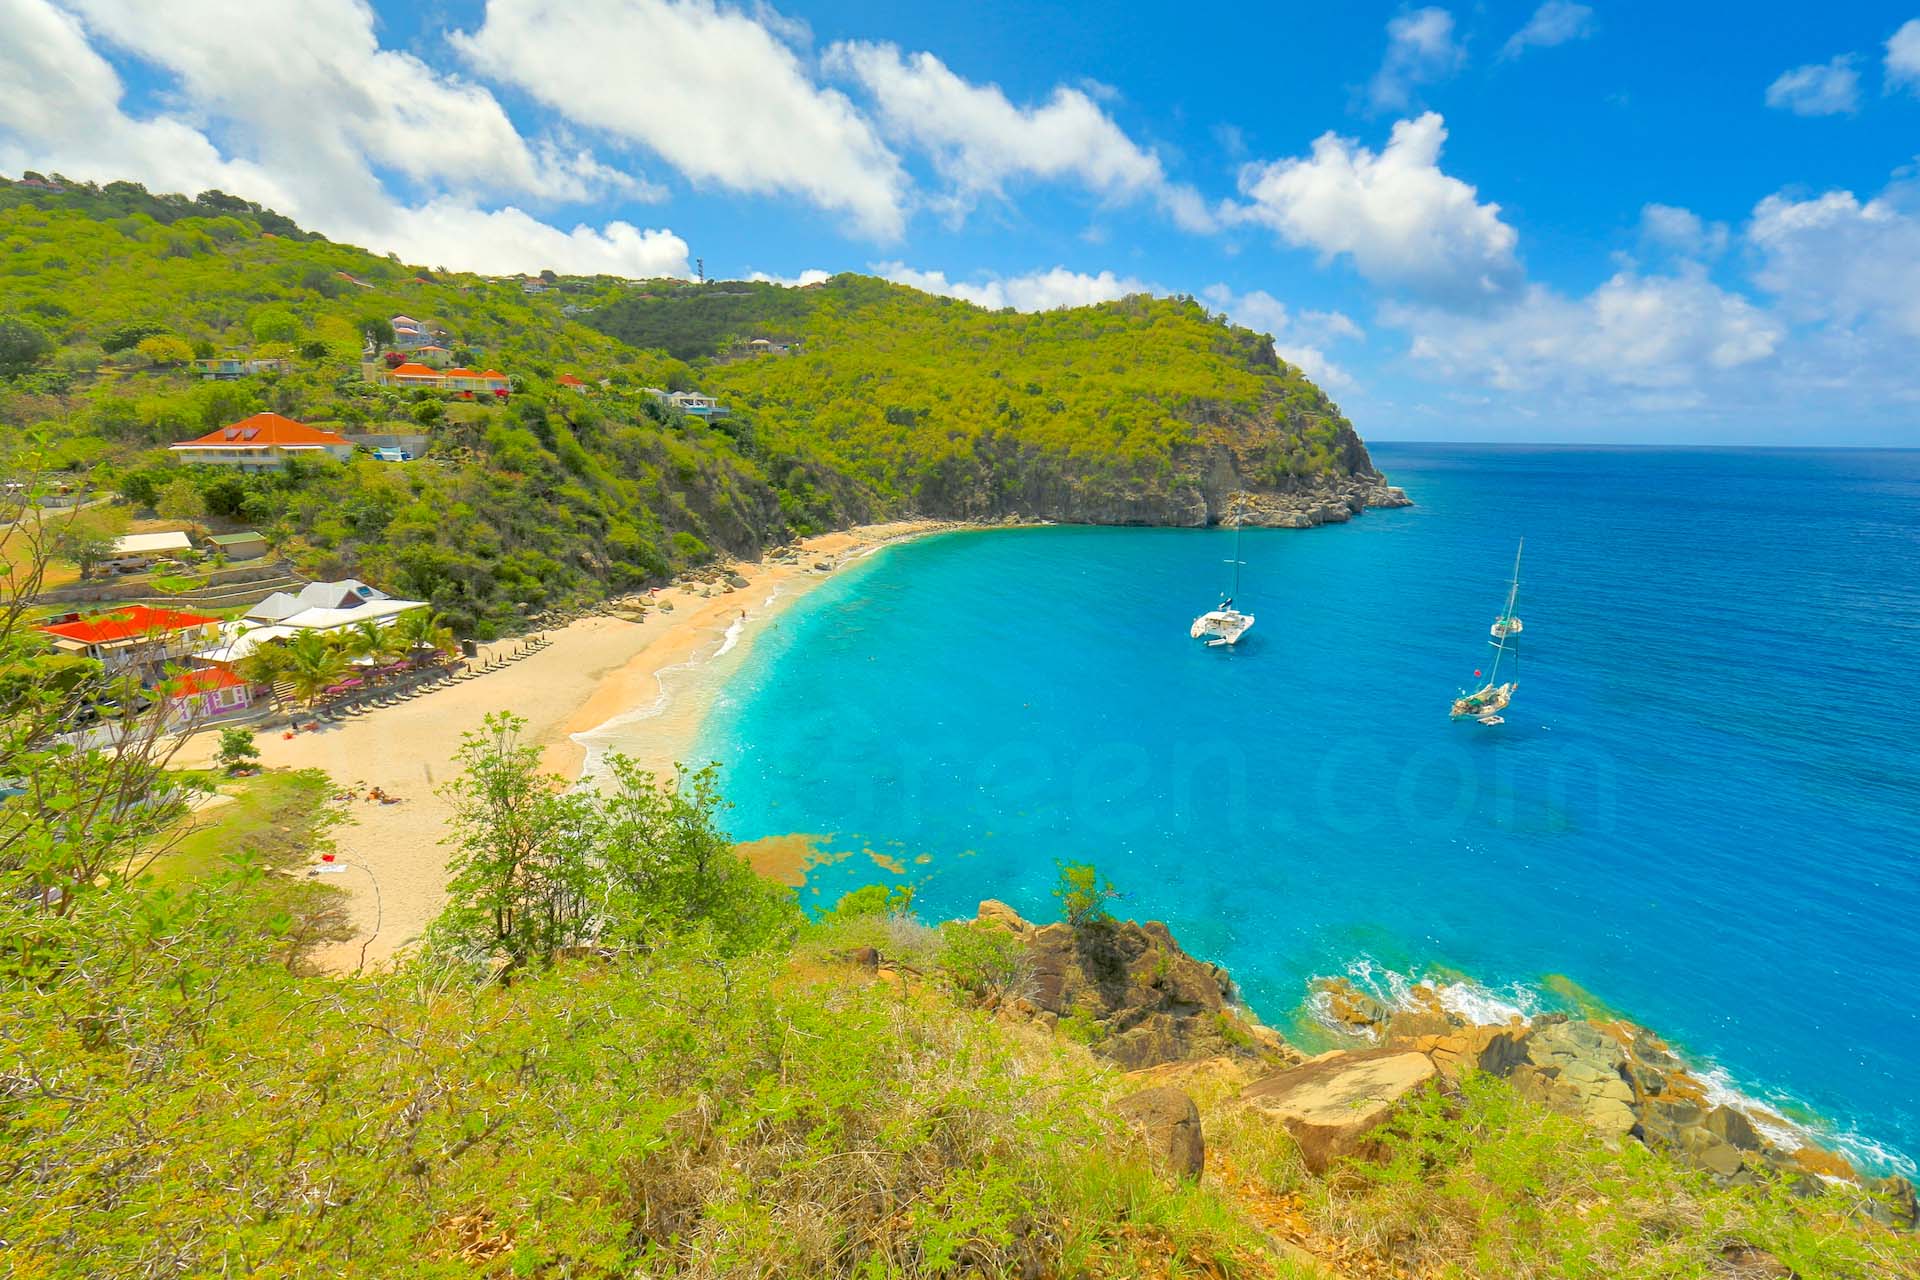 The Best of St. Barths and St. Tropez: Two Amazing French